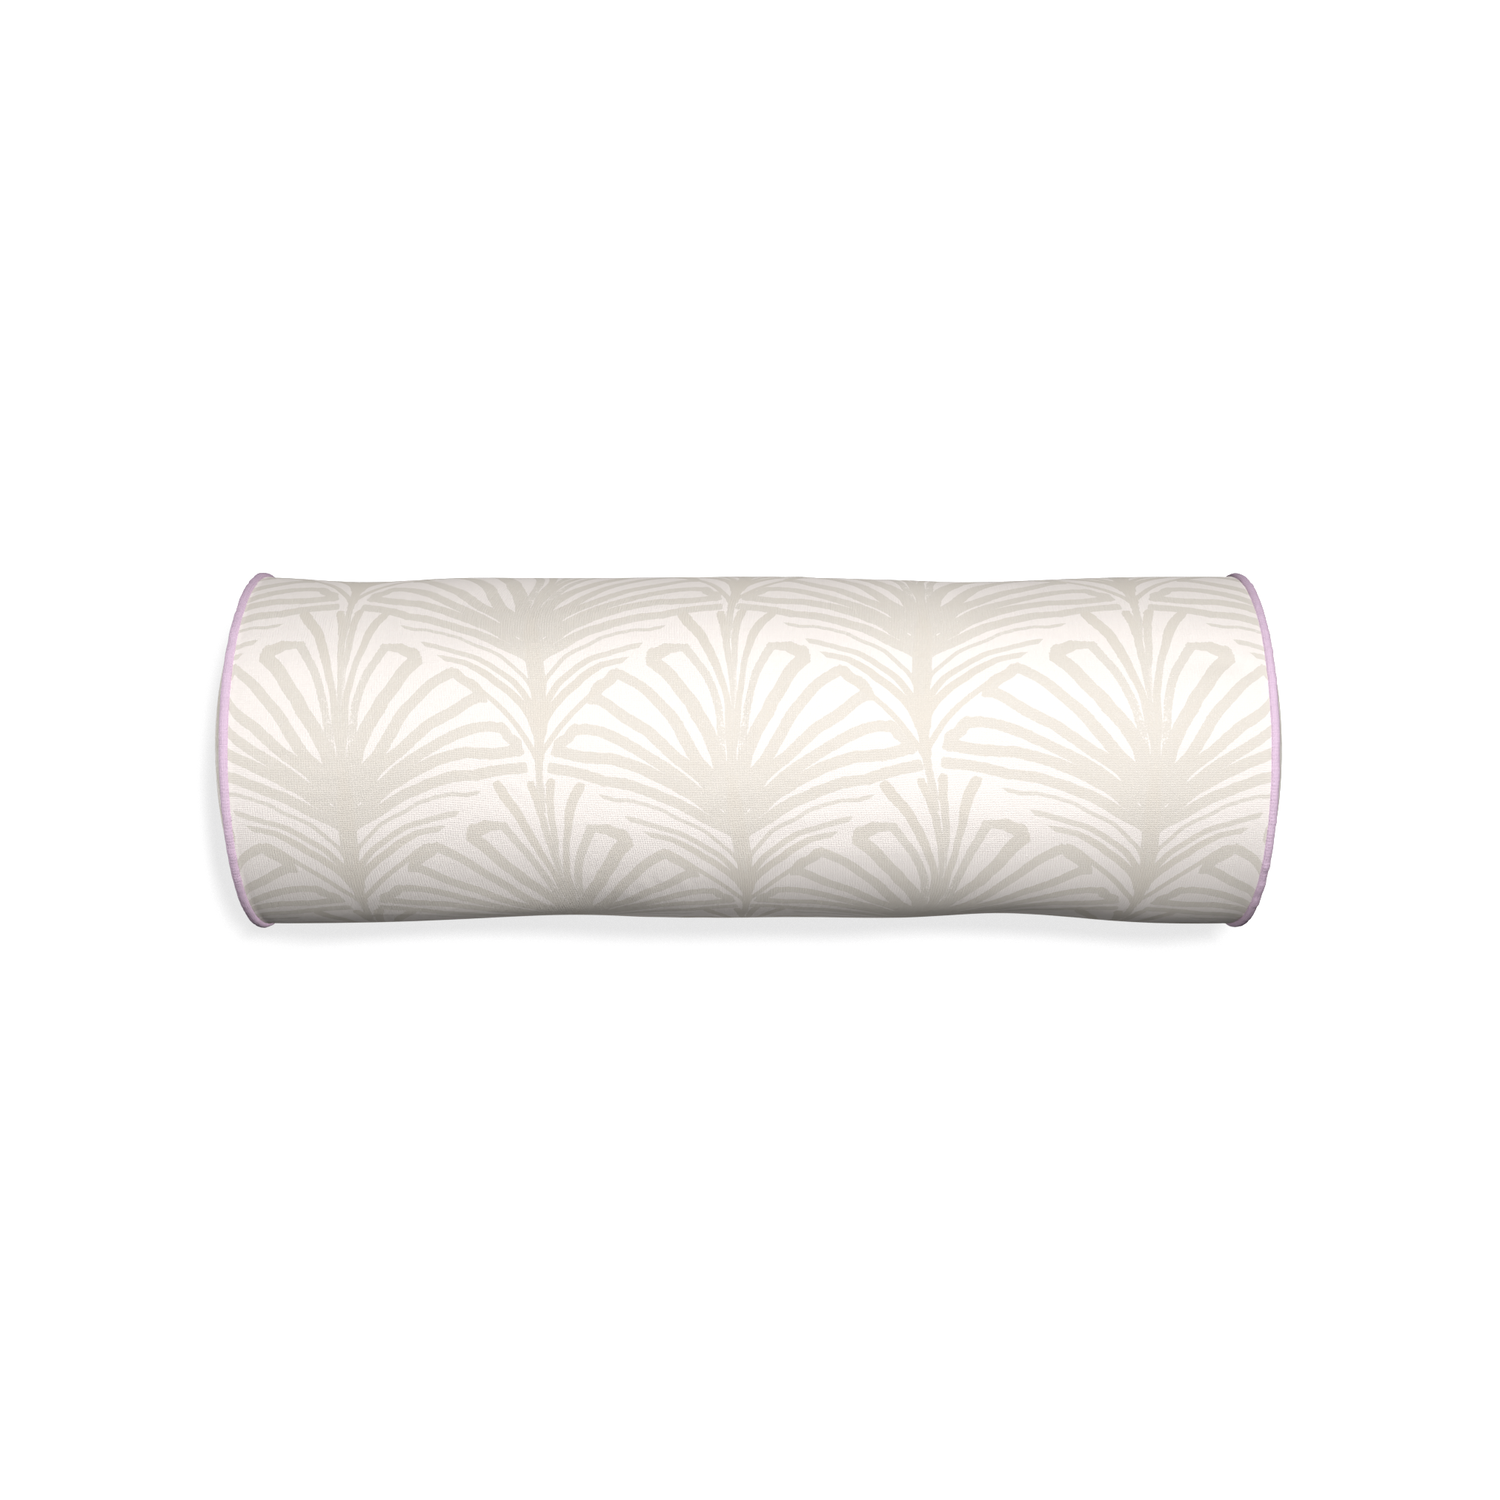 Bolster suzy sand custom beige palmpillow with l piping on white background